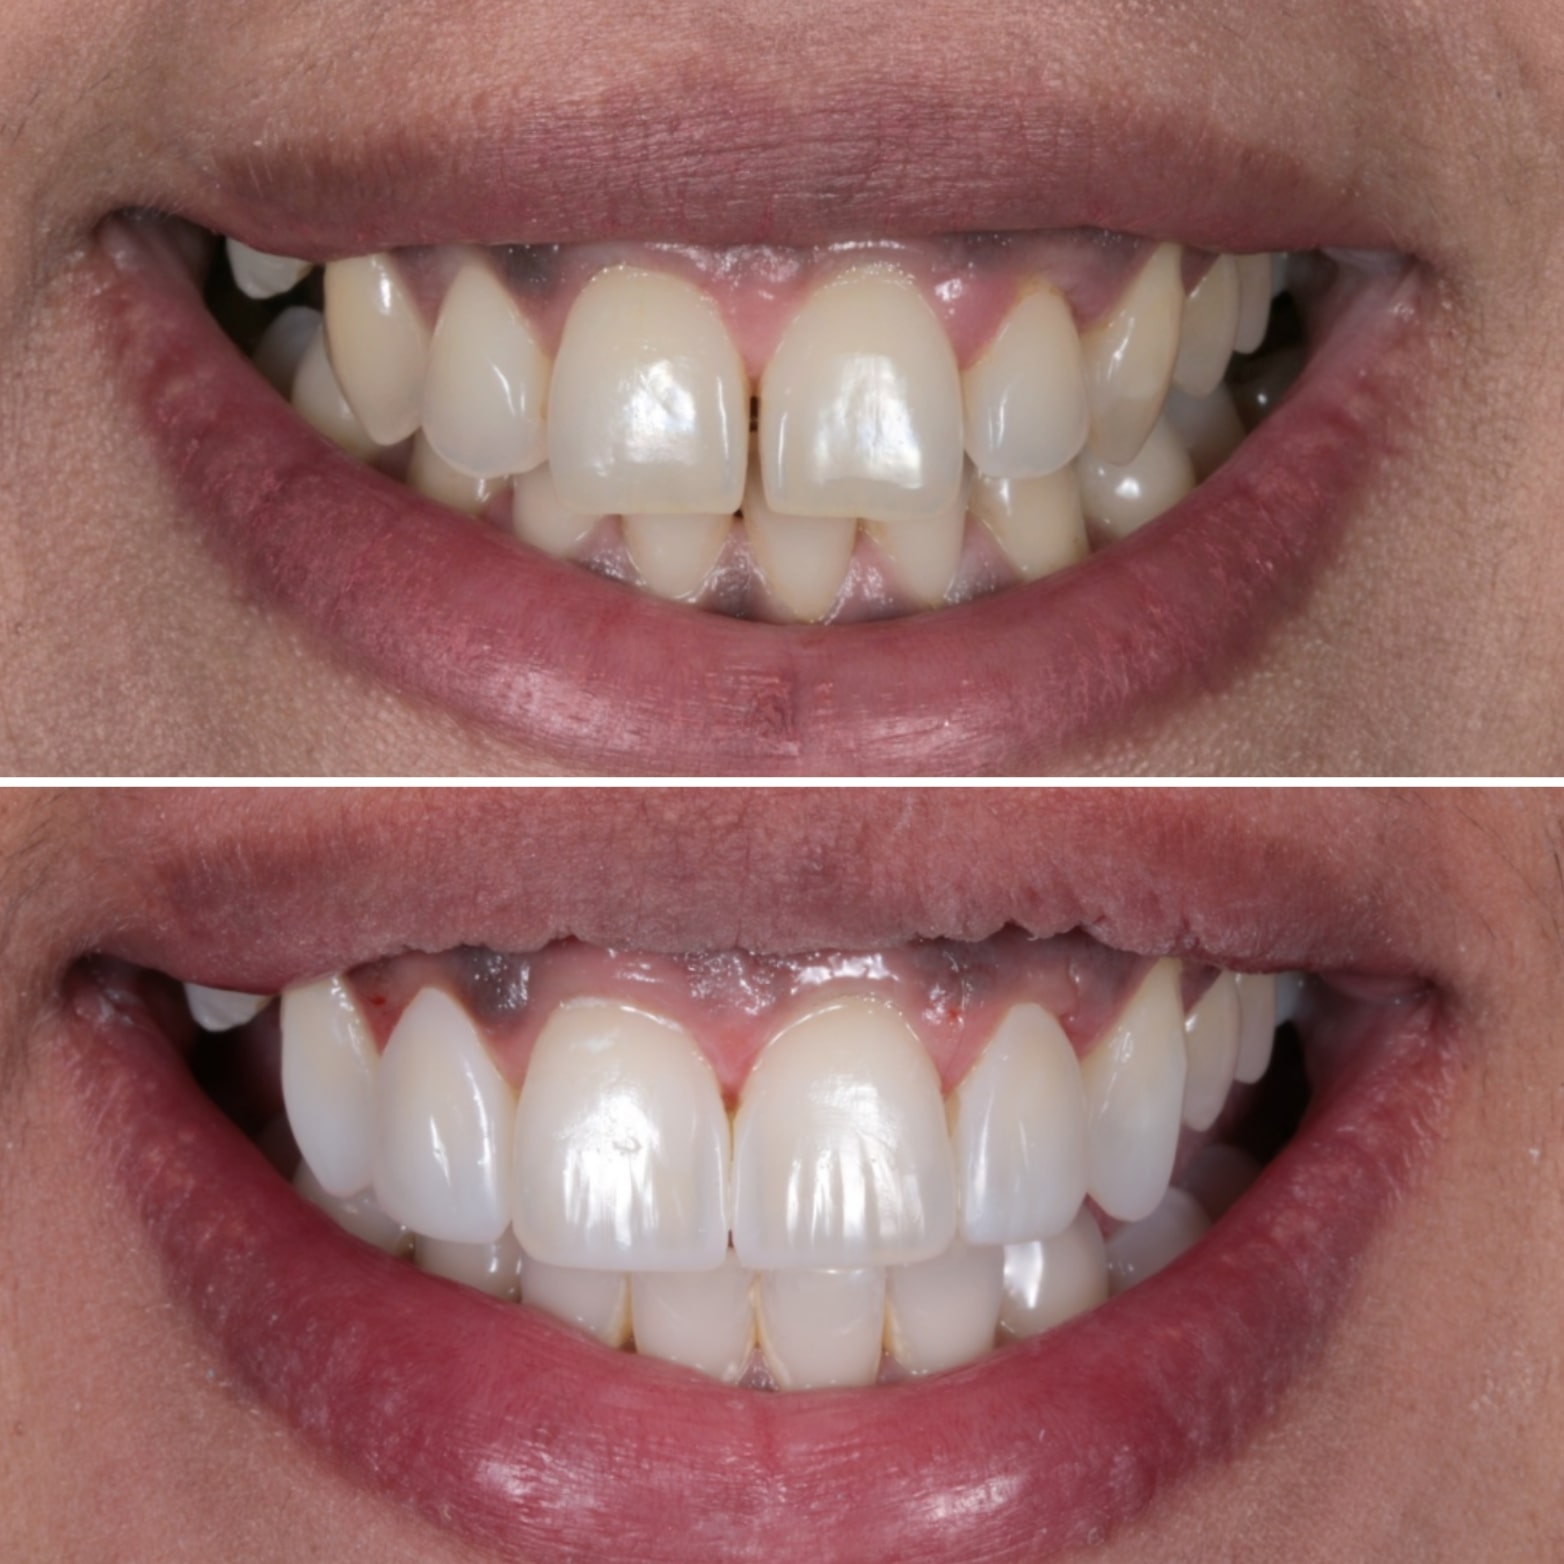 A new Invisalign patient at Charisma Clinic Stockport